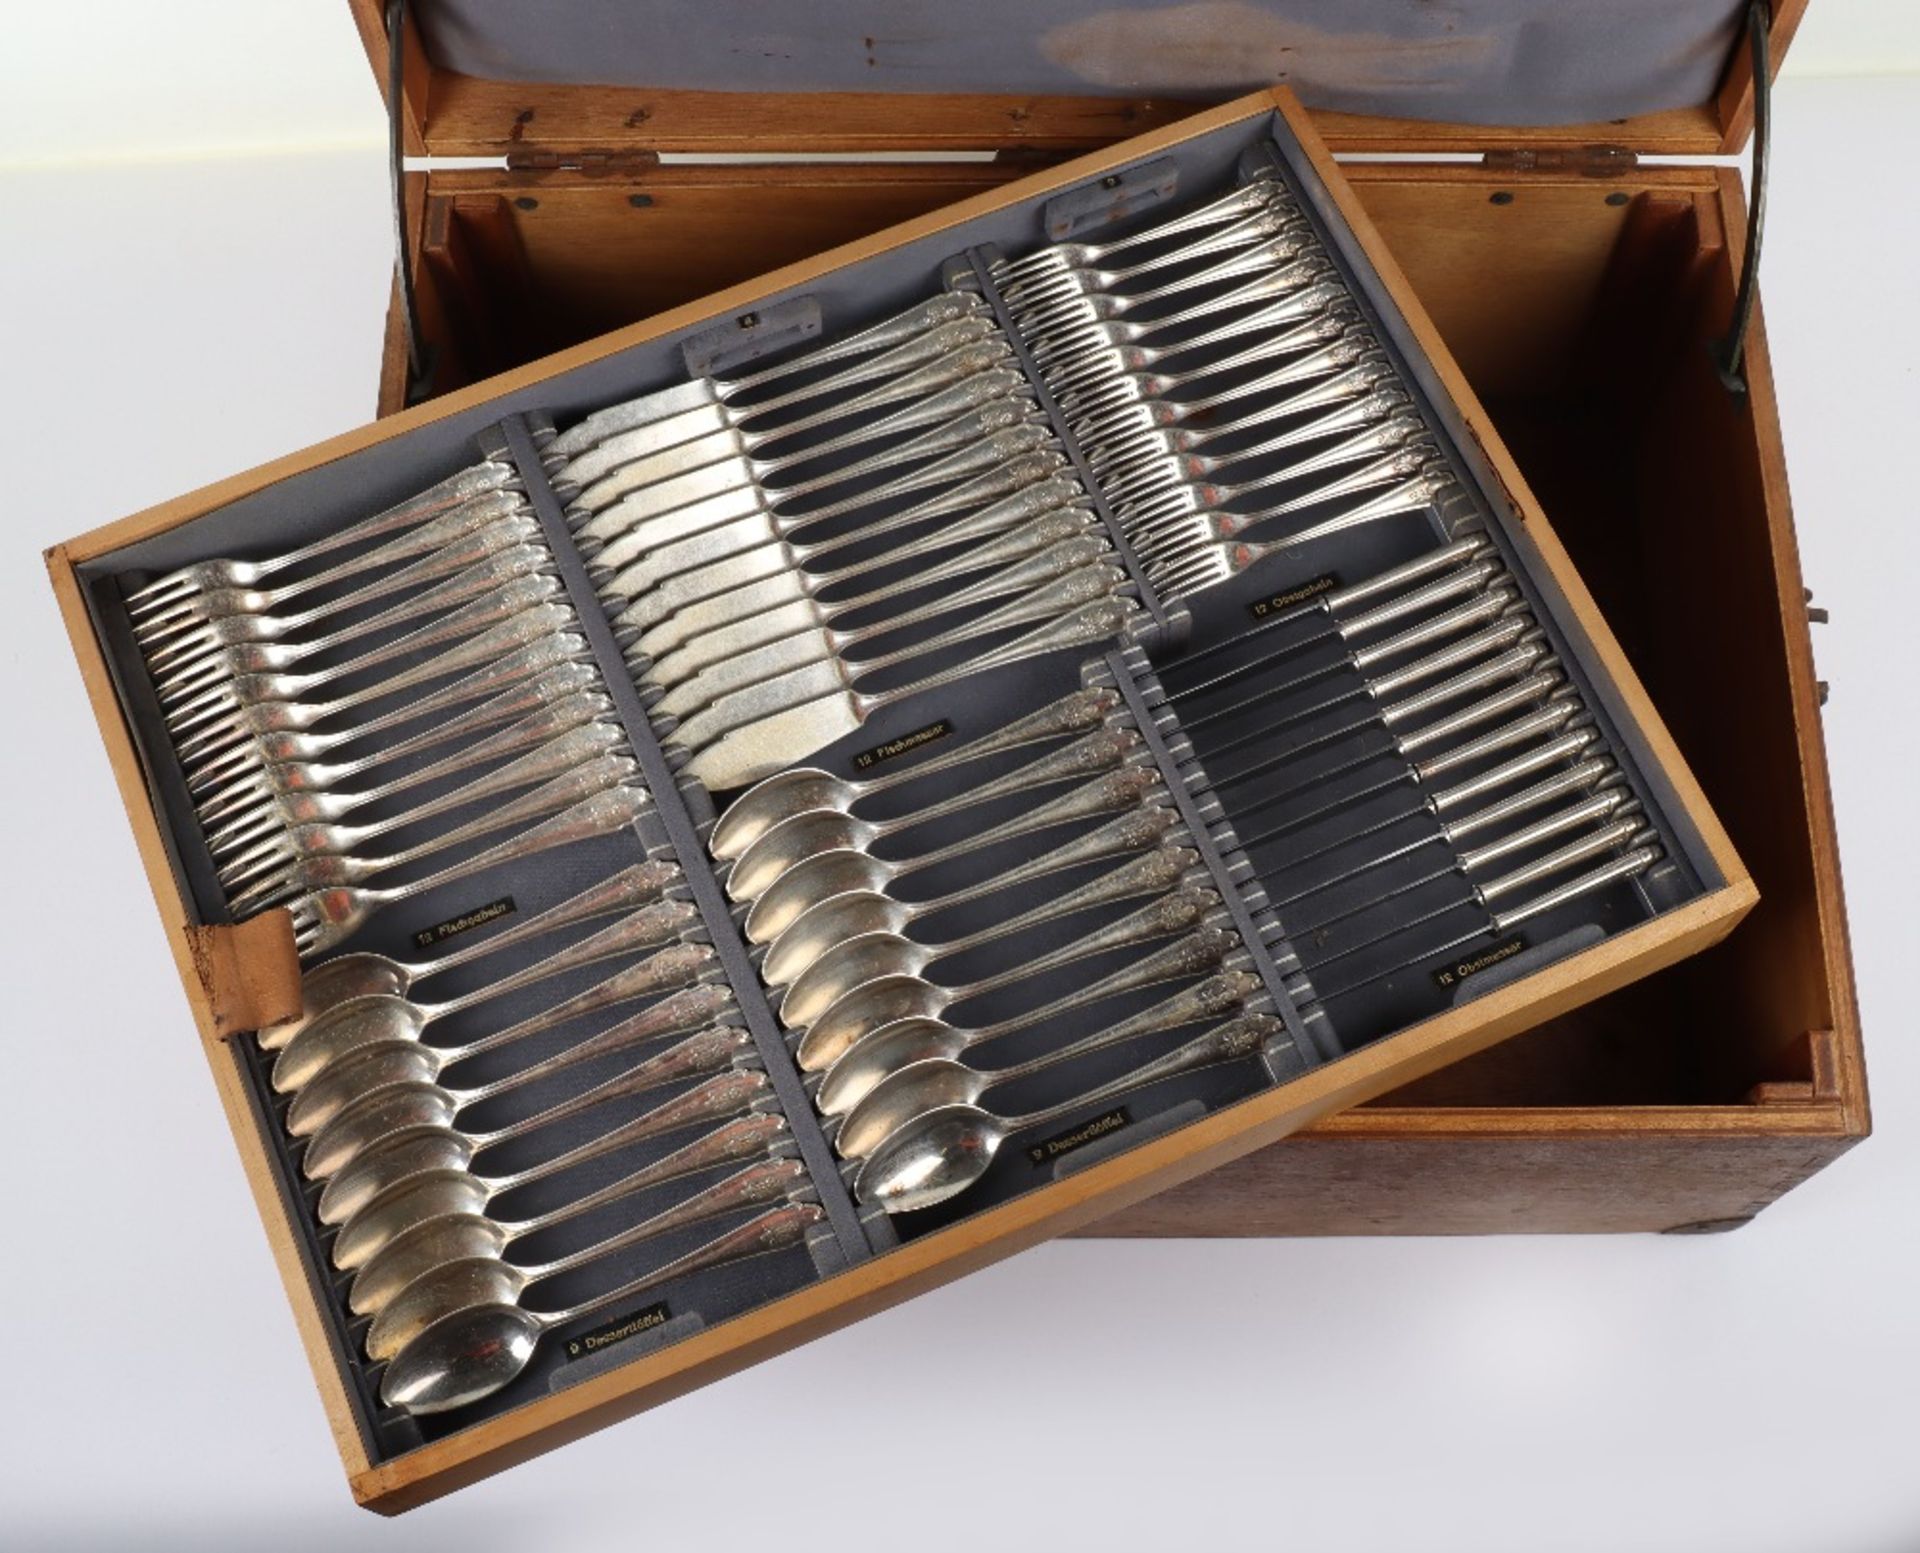 Cased Canteen of Formal Pattern NSDAP Cutlery Liberated From German Embassy in Spain - Image 26 of 34